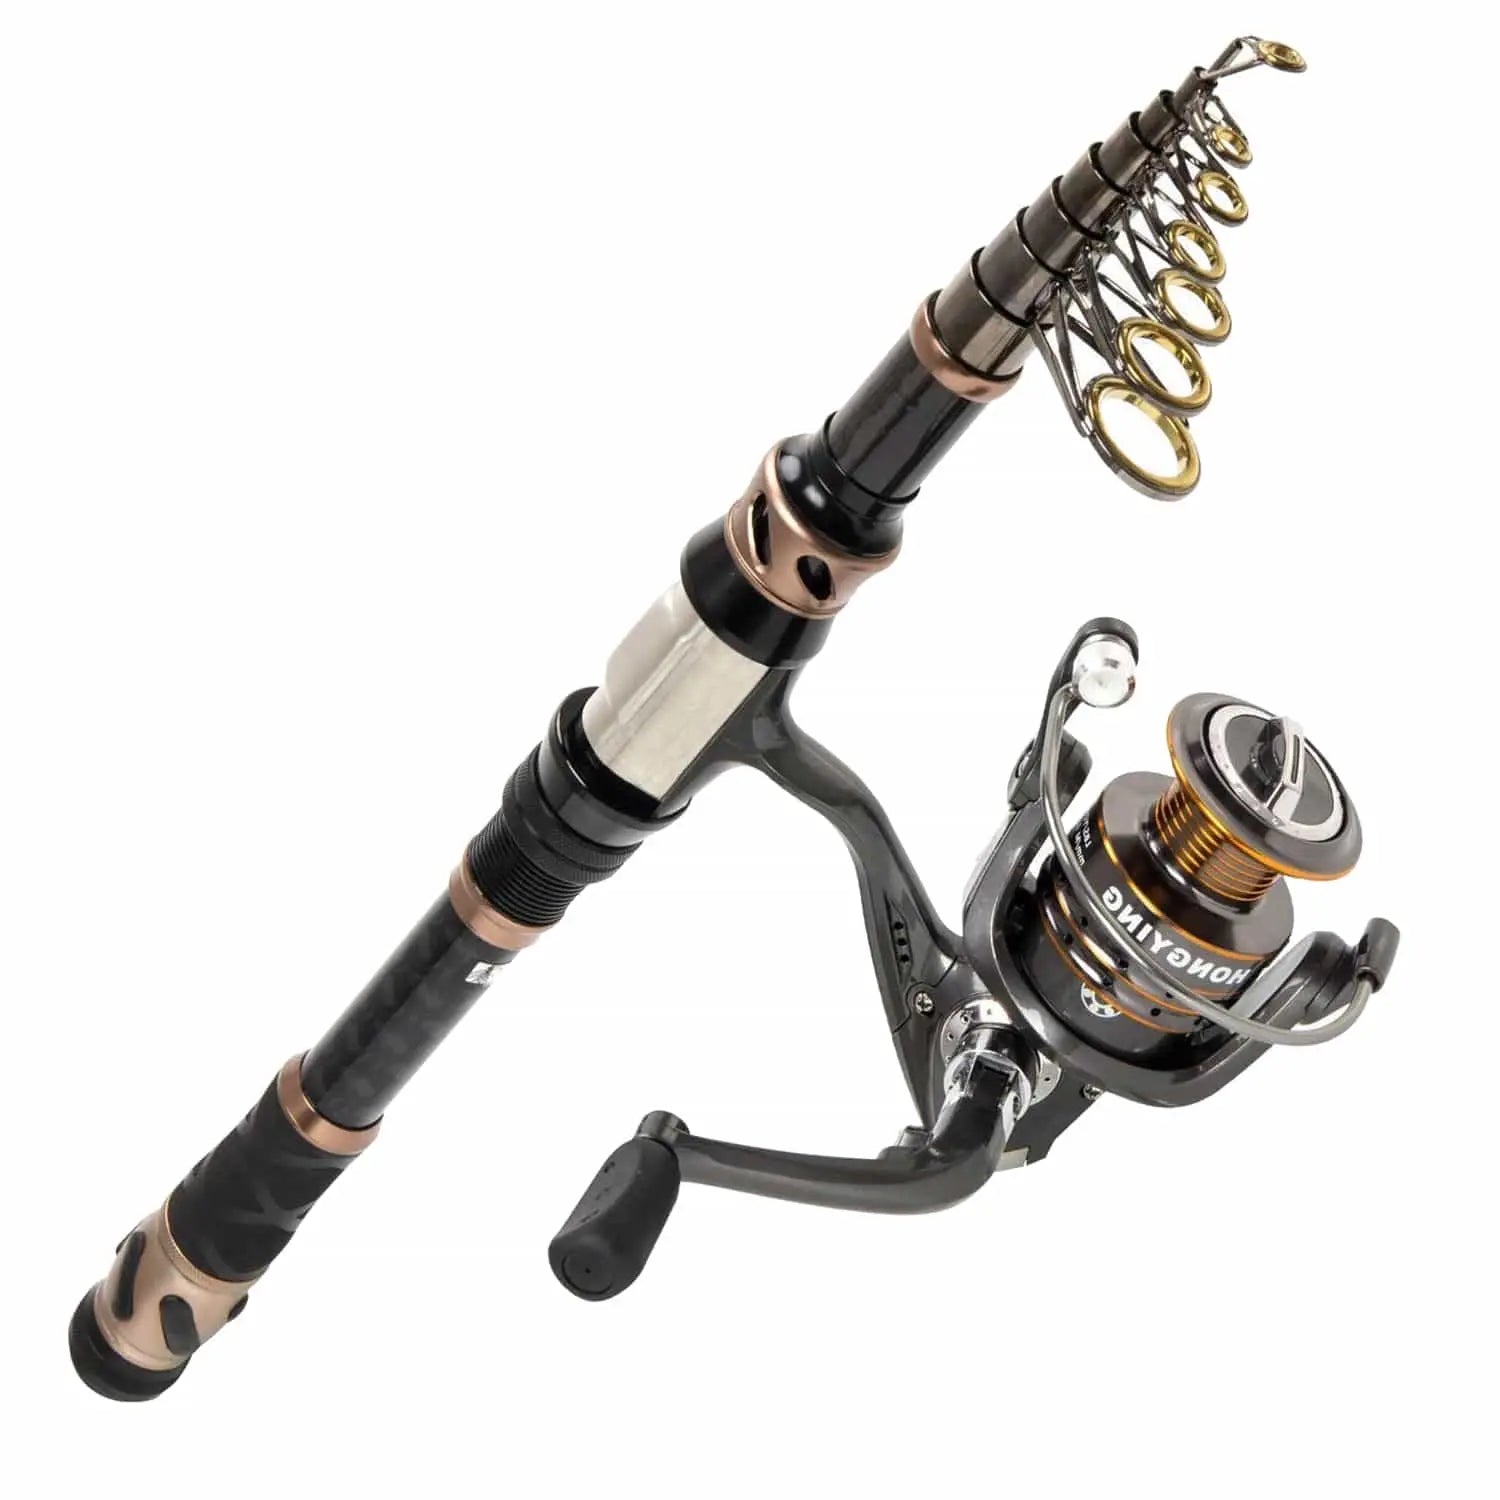 Xuanheng Telescopic Fishing Rod Throwing Device Portable Travel Hard Fishing Pole Long Fishing Rod Red Head Other